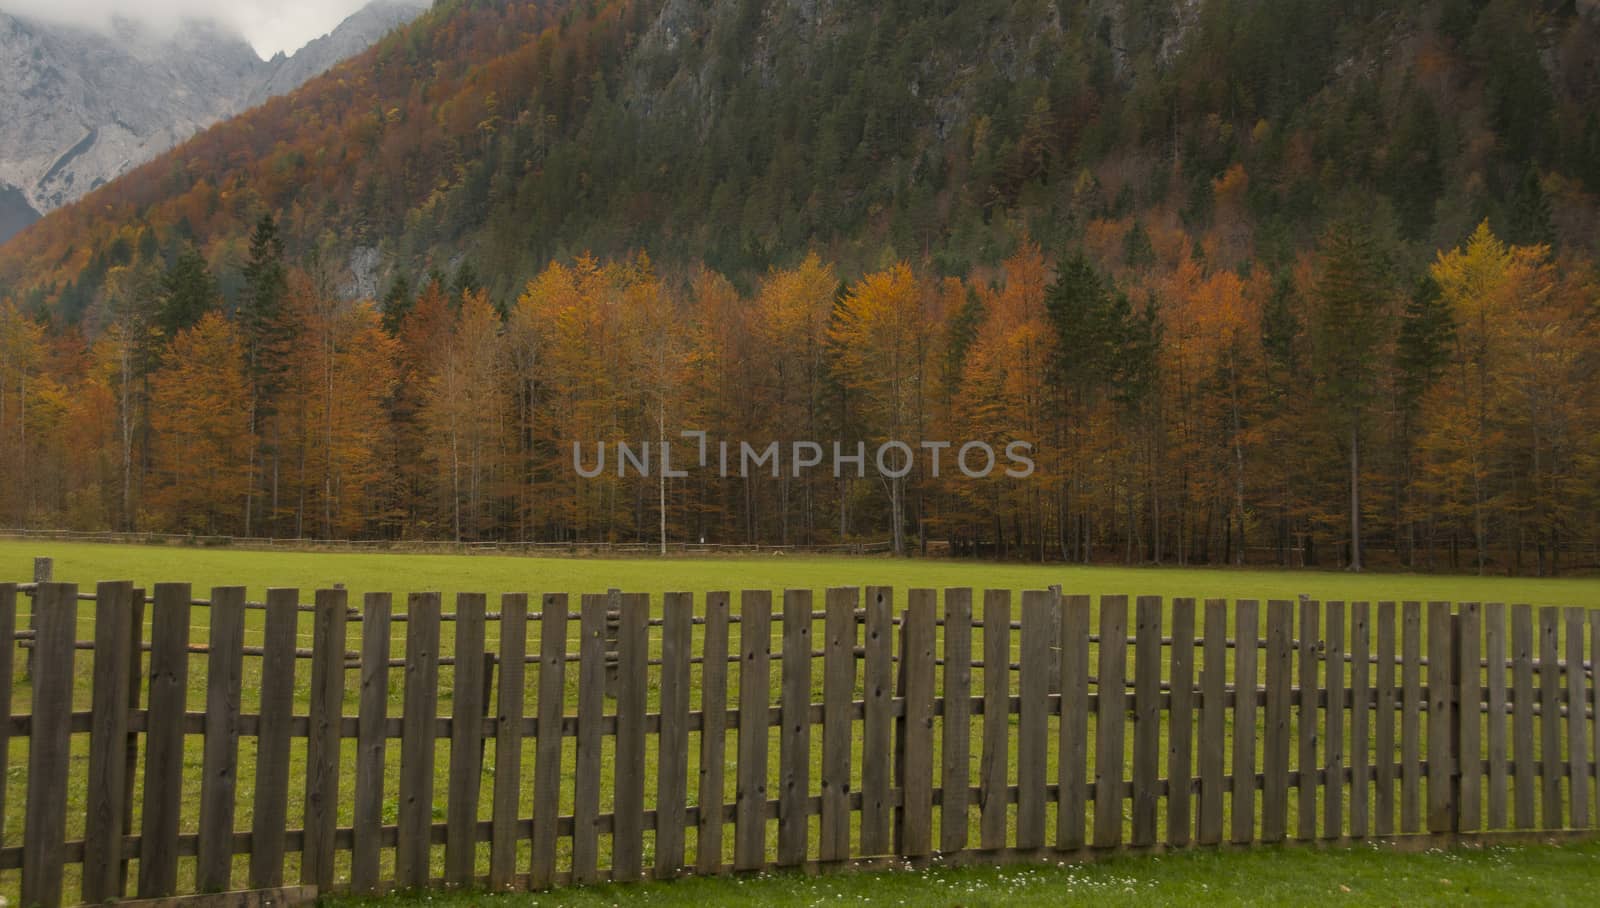 Autumn colors in Logarska dolina, Slovenia. Colorful red, orange and yellow tree foliage, Alps in background, meadow in foreground.